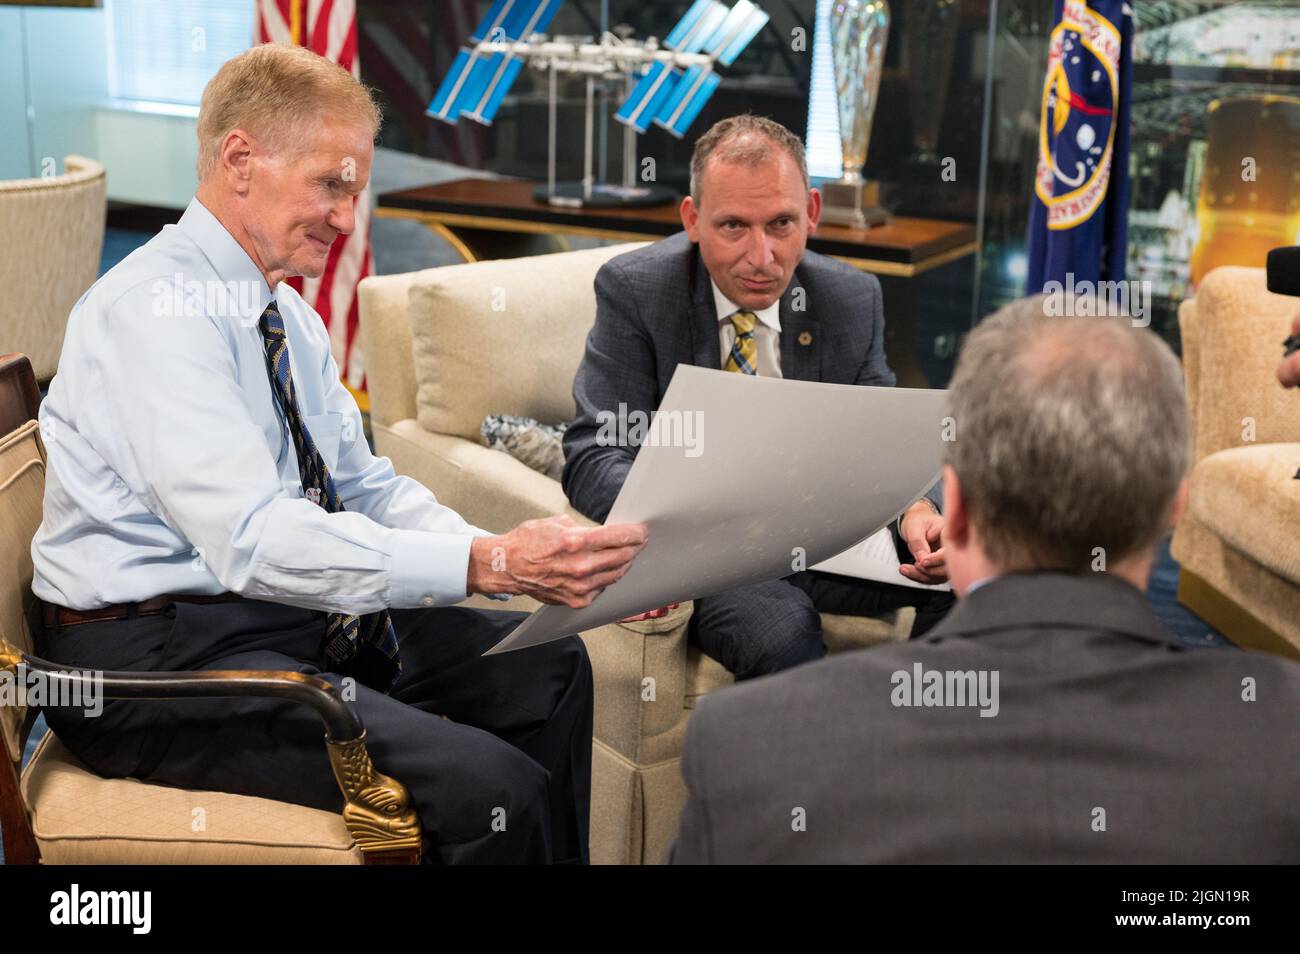 NASA Administrator Bill Nelson, left, and Associate Administrator for NASA’s Science Mission Directorate, Thomas Zurbuchen, center, react to the first full-color images from NASA’s James Webb Space Telescope in a preview meeting with Webb project scientist at the Space Telescope Science Institute, Klaus Pontoppidan, right, Monday, July 11, 2022 at the Mary W. Jackson NASA Headquarters building in Washington. The first images and spectroscopic data from the world’s largest and most powerful space telescope, set to be released July 11 and 12, will demonstrate Webb at its full power, as it begins Stock Photo